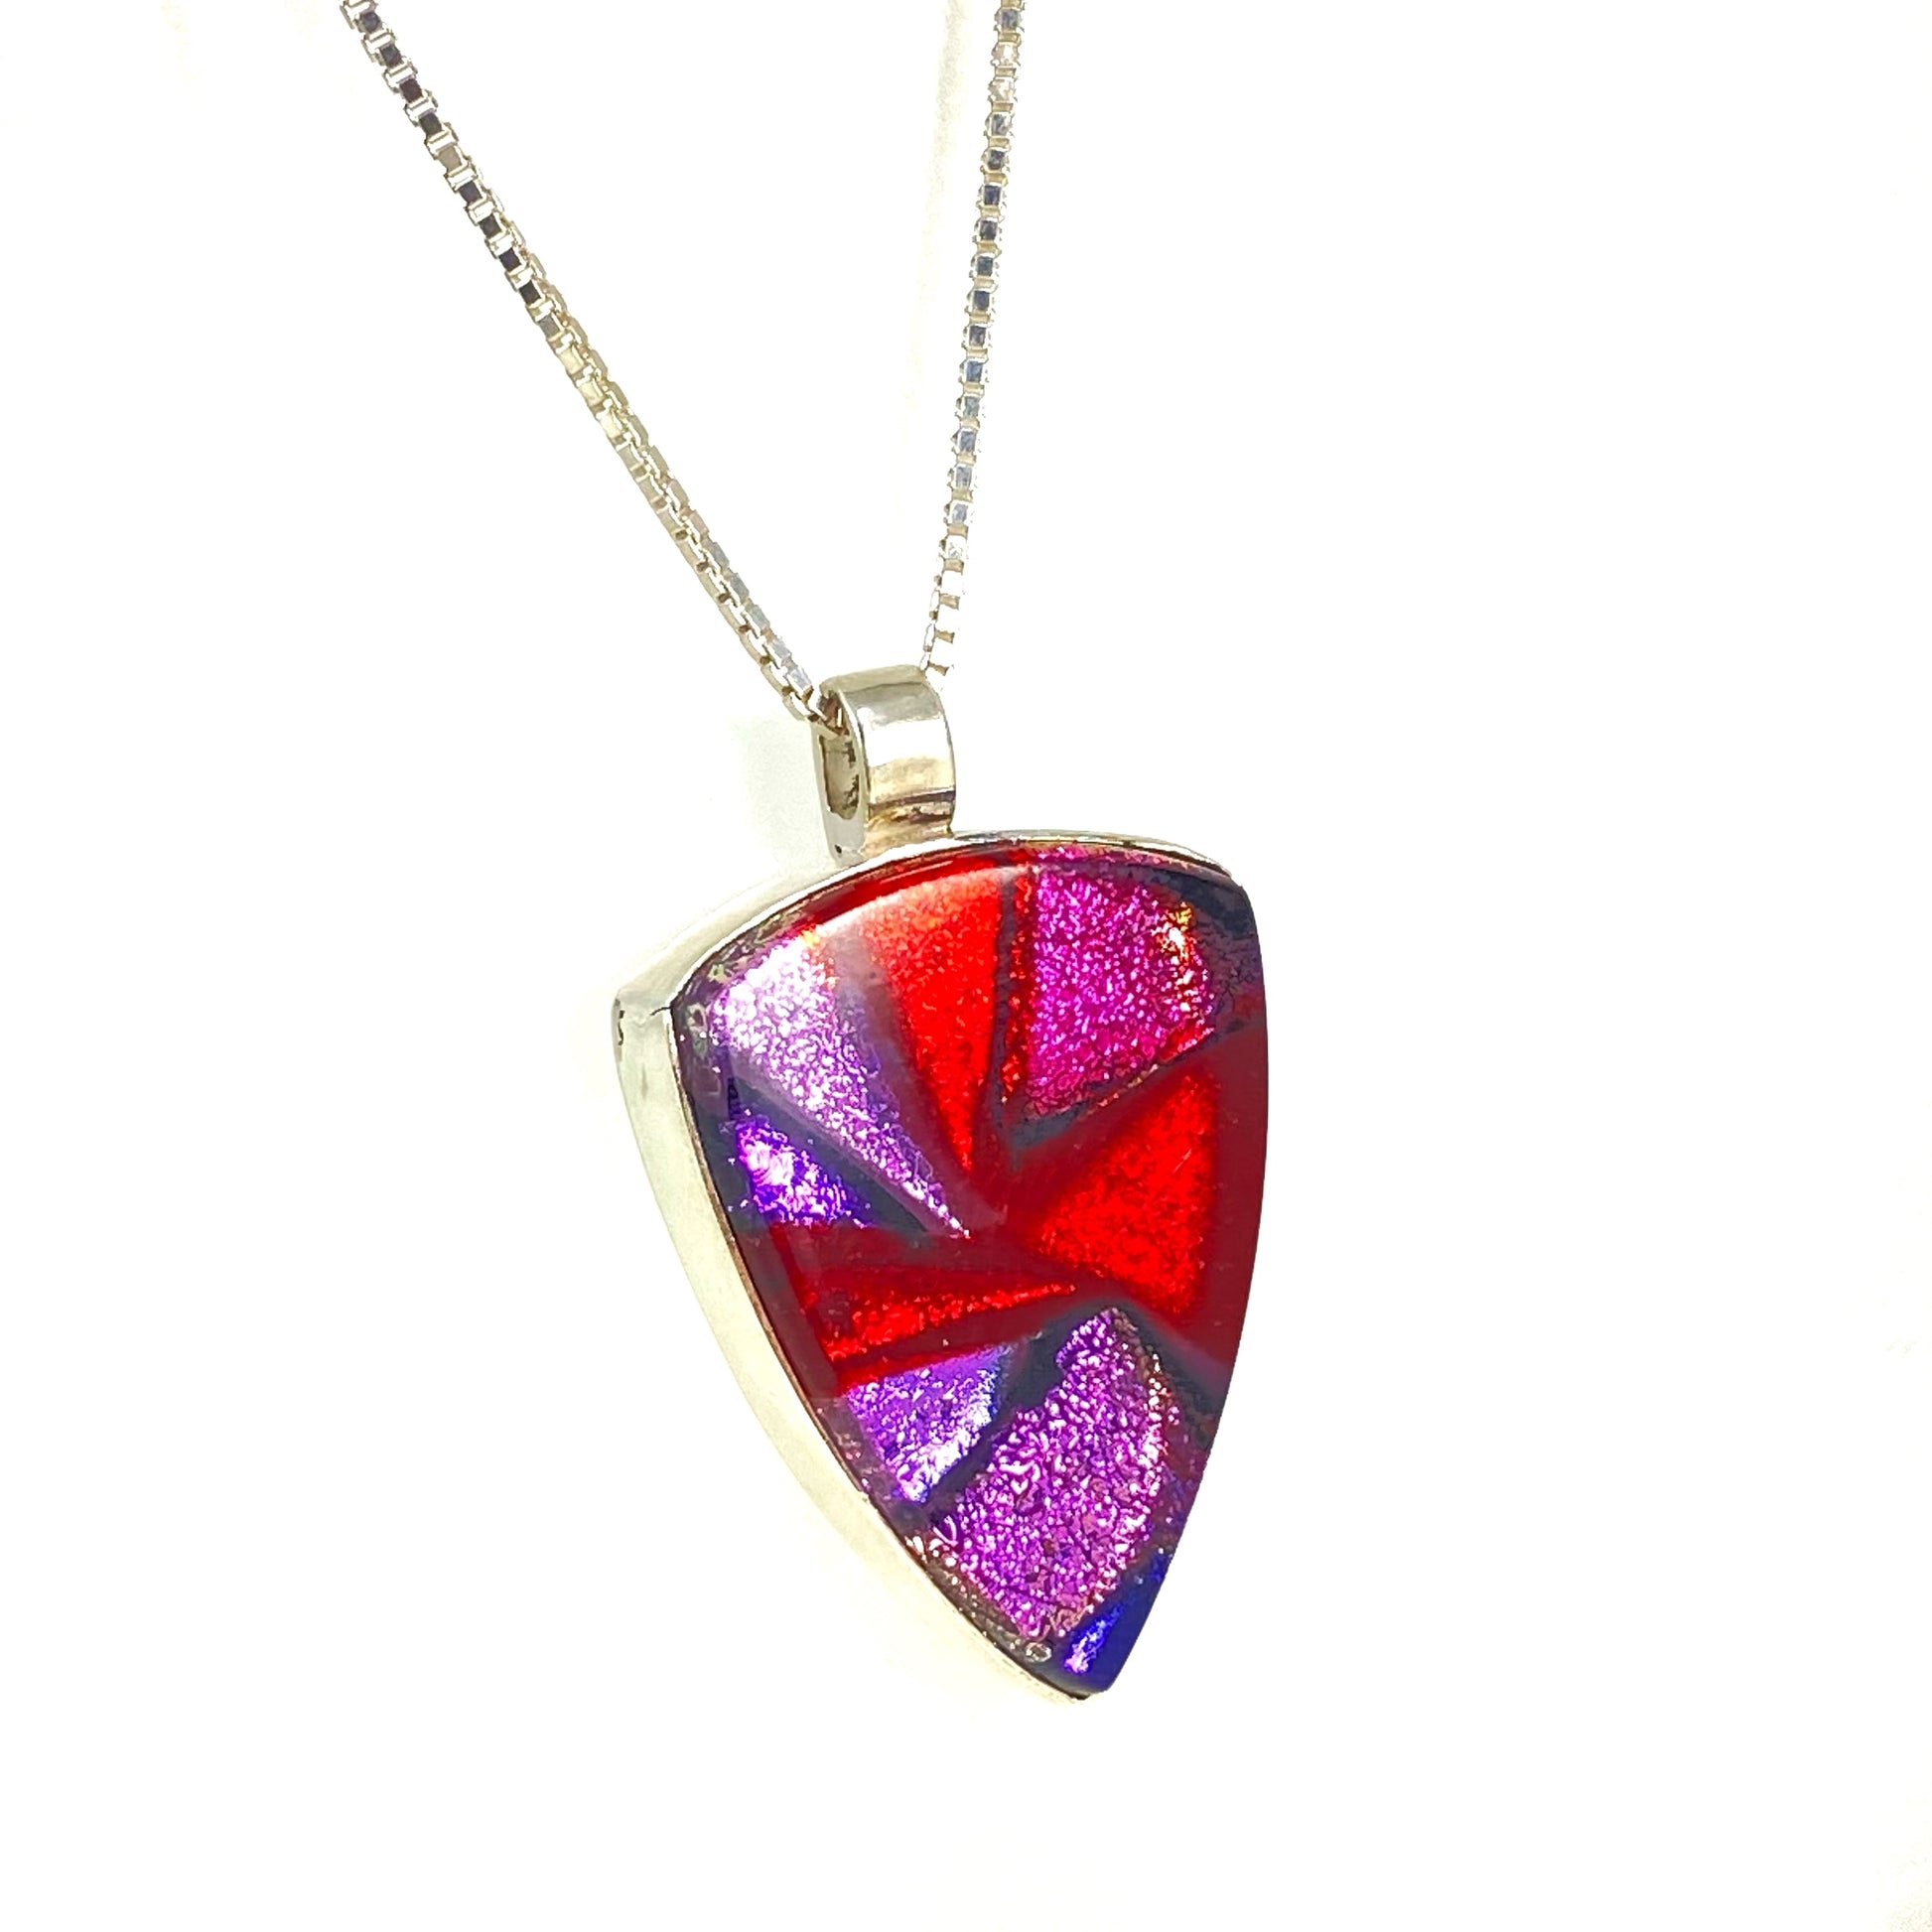 pink, red and purple mixture necklace, fused glass, glass jewelry, glass and silver jewelry, handmade, handcrafted, American Craft, hand fabricated jewelry, hand fabricated jewellery, Athen, Georgia, colorful jewelry, sparkle, bullseye glass, dichroic glass, art jewelry